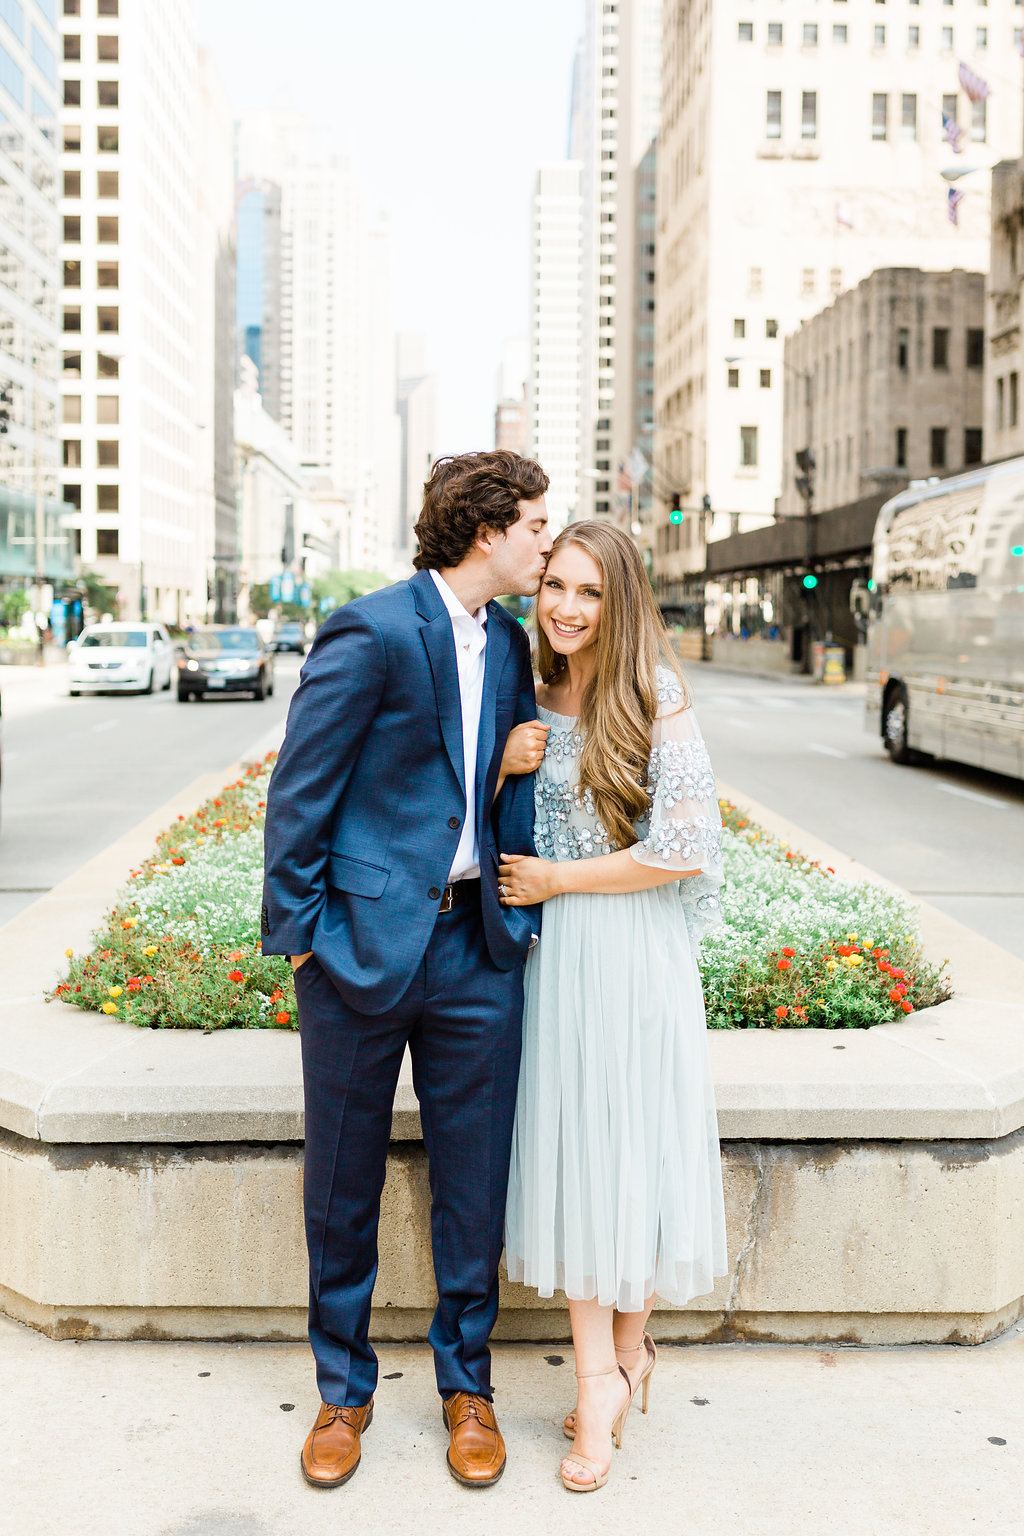 What to wear for engagements | Miss Madeline Rose